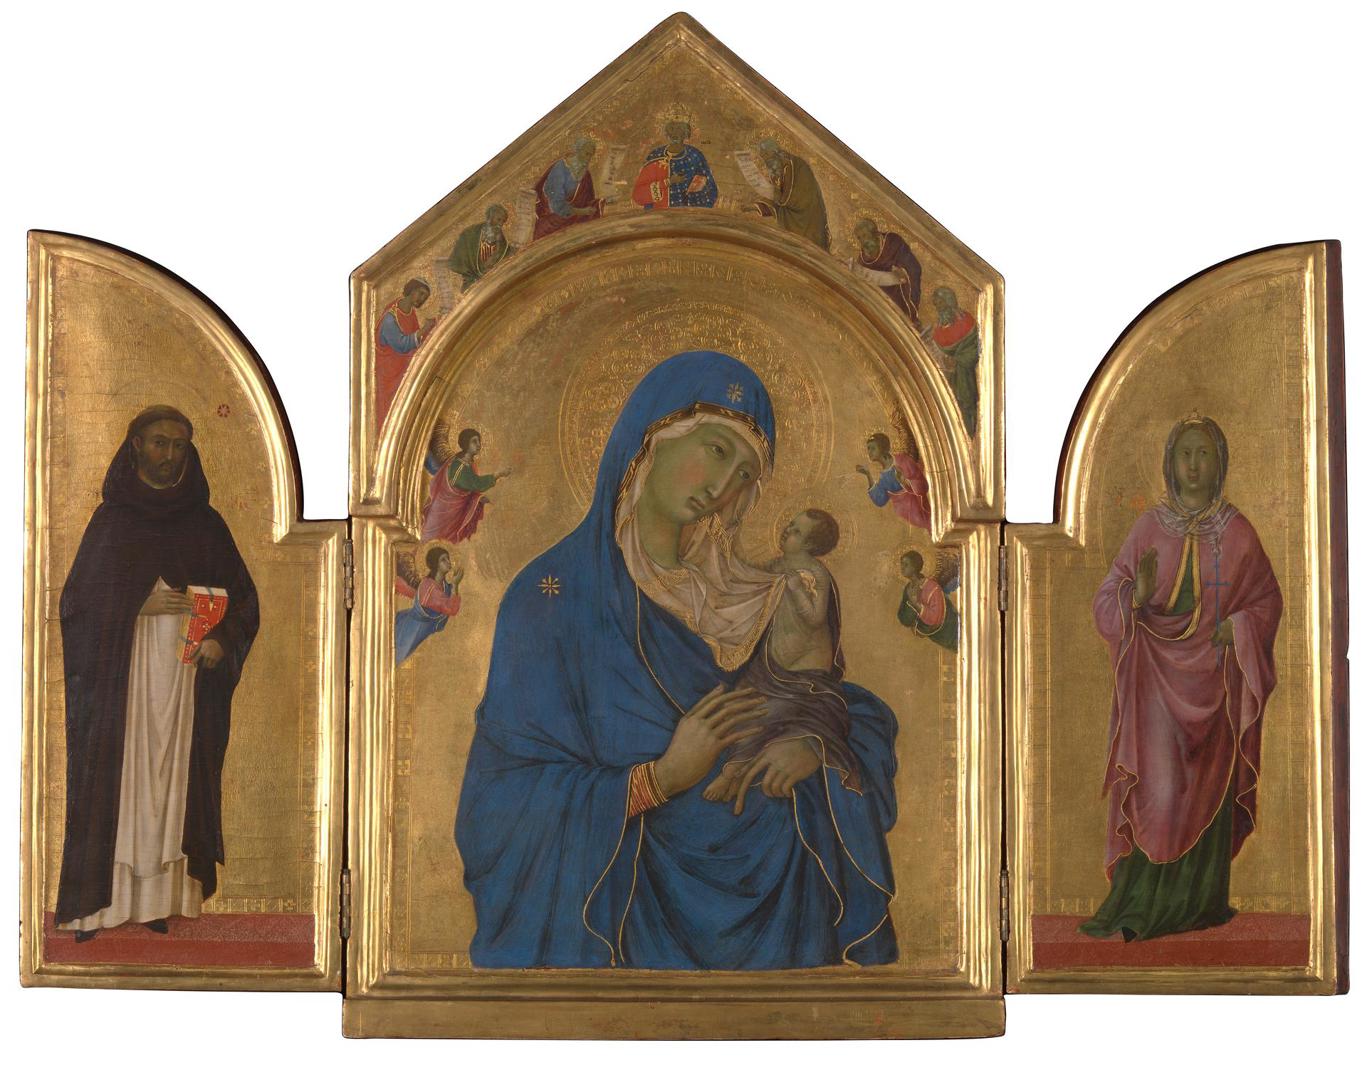 The Virgin and Child with Saints Dominic and Aurea by Duccio